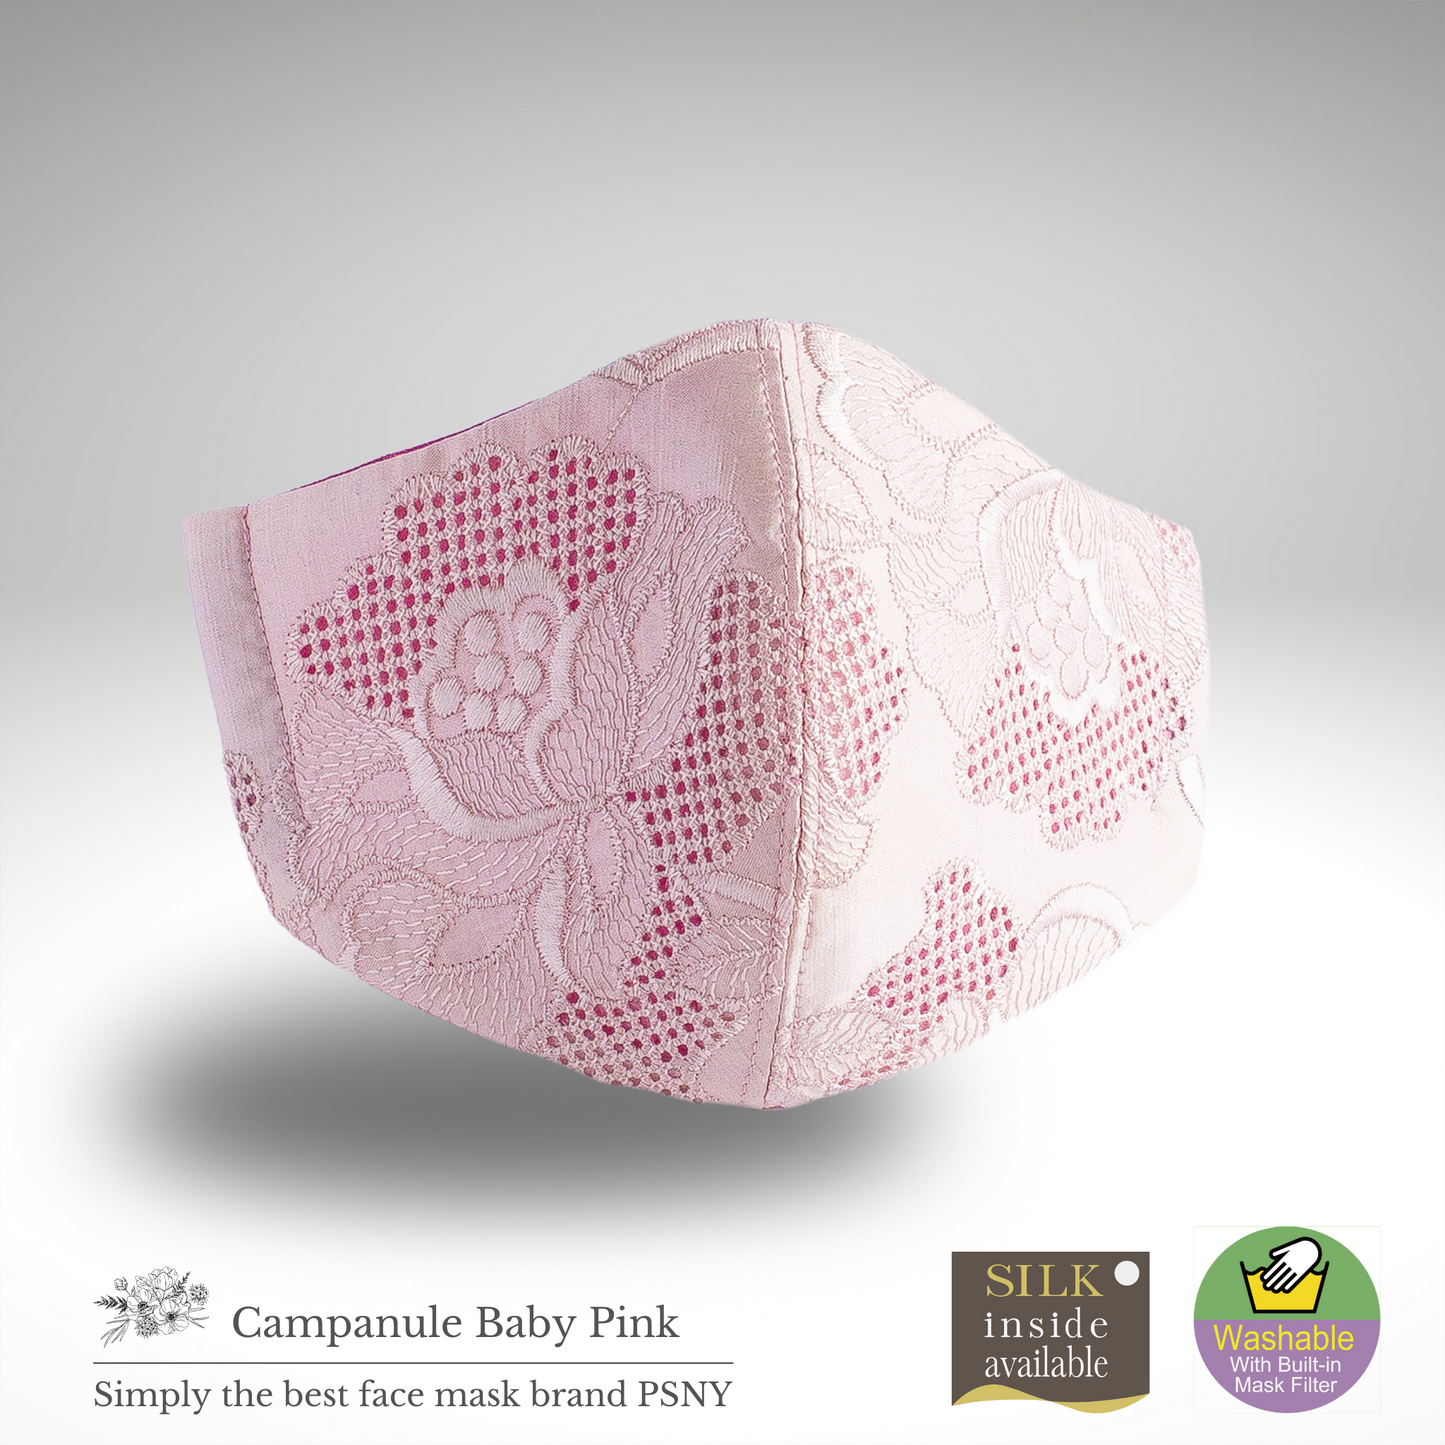 Campanule Baby Pink Summer Specs Lace Pollen Yellow Sand Non-Woven Filter Included Elegant Neat Cute Cute Beauty Beautiful 3D Adult Mask Floral Pattern Mask CP08